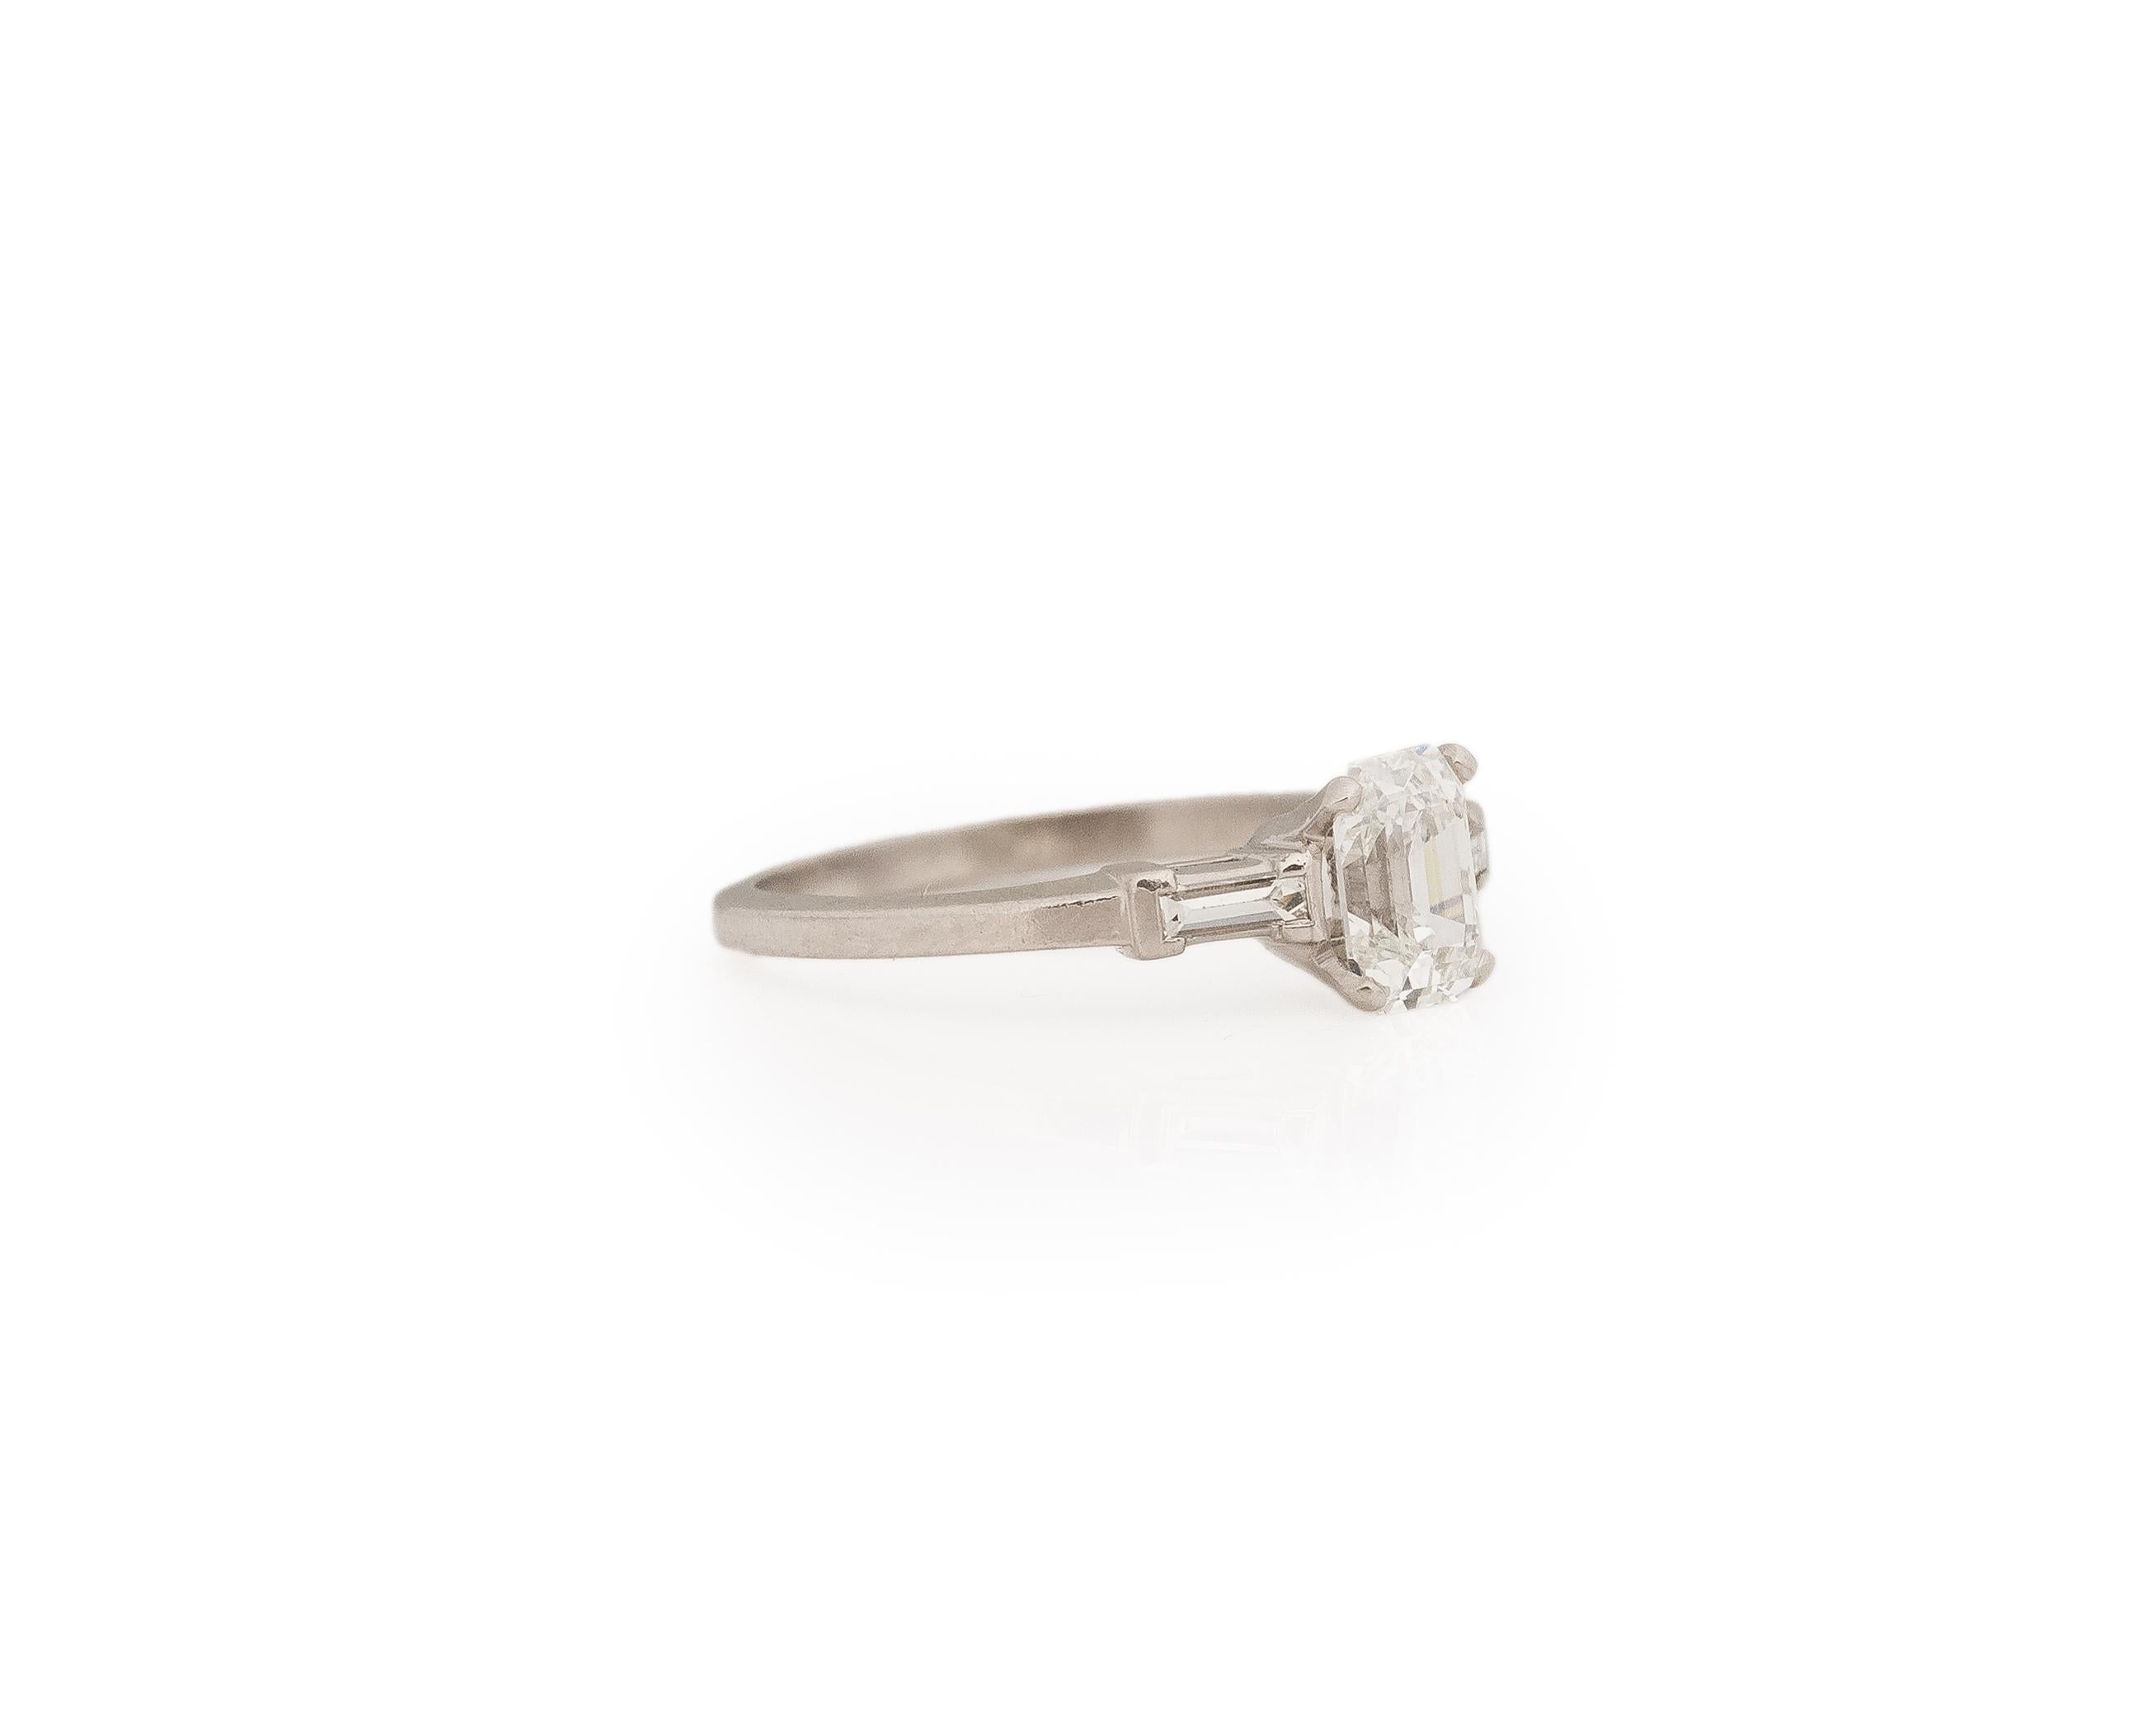 Year: 1930s

Item Details:
Ring Size: 6.5
Metal Type: Platinum [Hallmarked, and Tested]
Weight: 3.3 grams

Diamond Details:

GIA Report#:6234023260
Weight: .91ct total weight
Cut: Old European brilliant
Color: G
Clarity: VS1
Type: Natural

Side